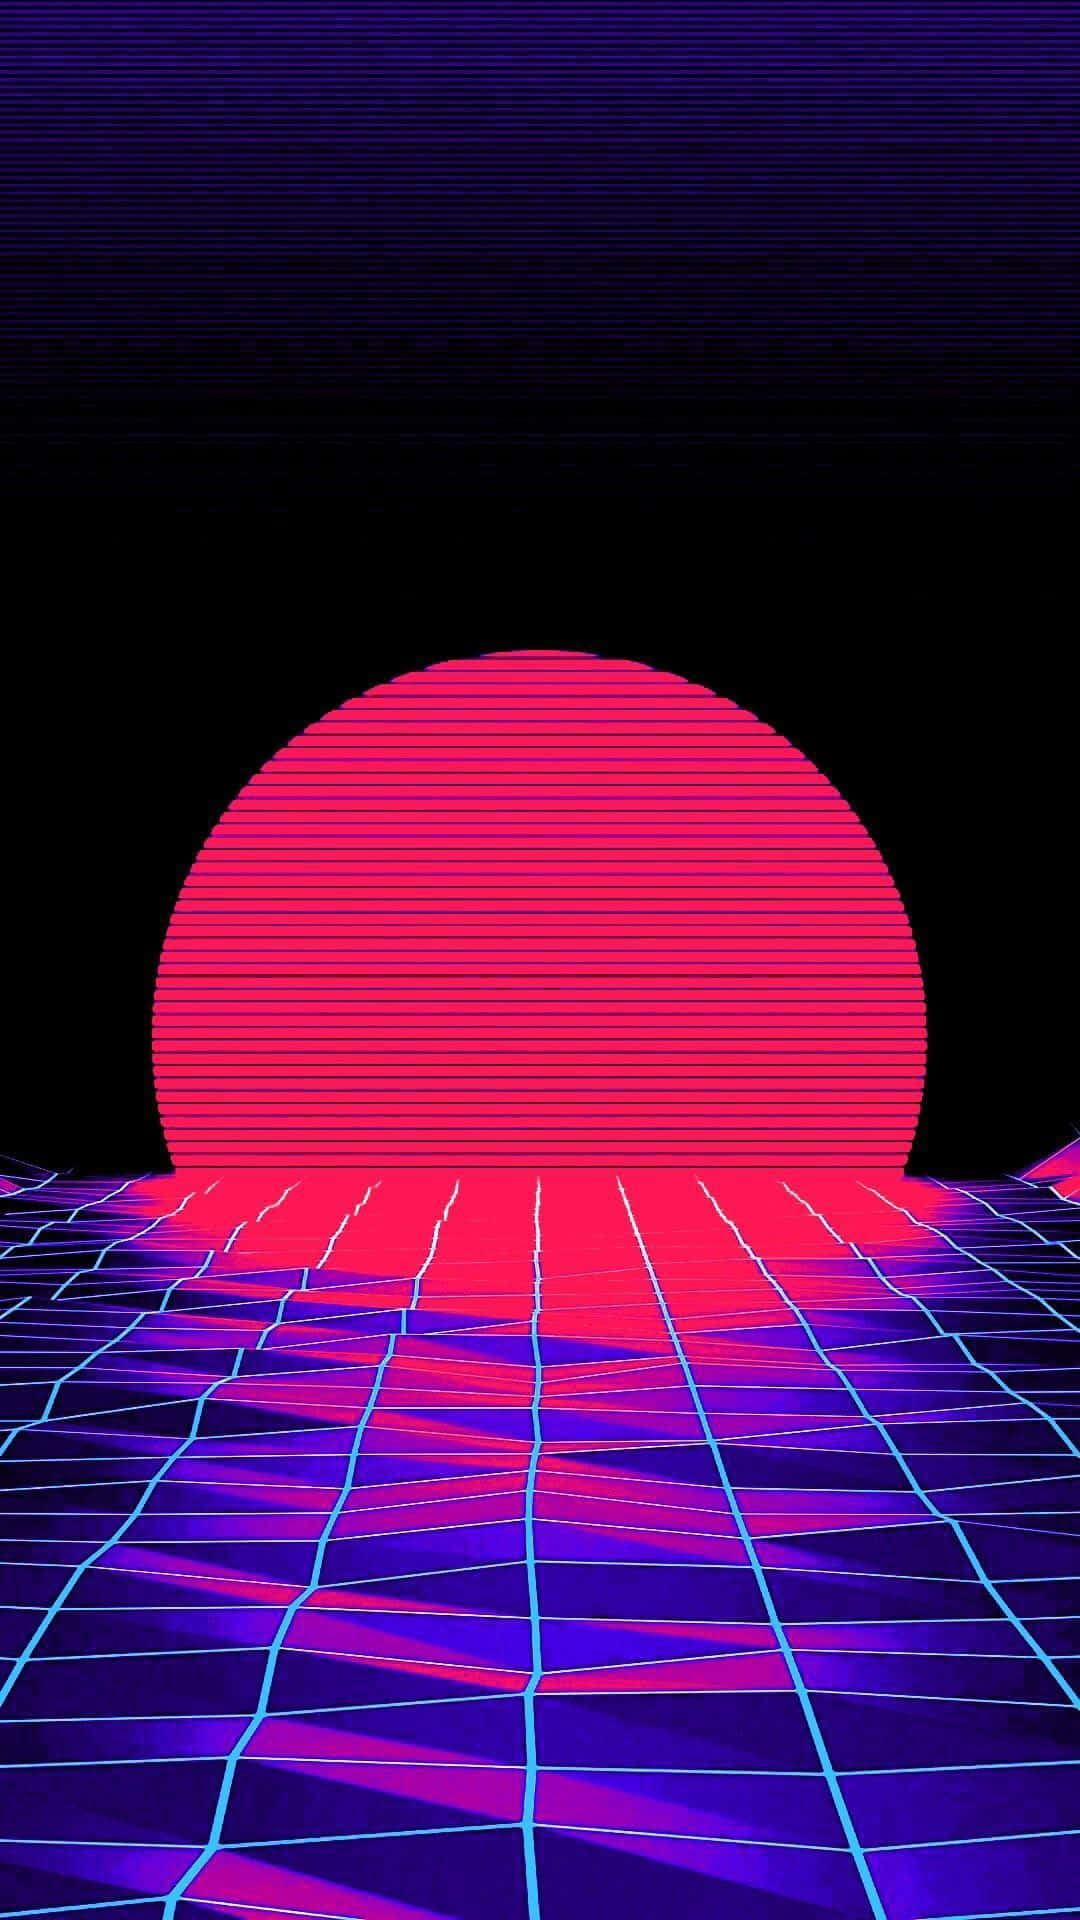 Upgrade your look with the Vaporwave Iphone Wallpaper